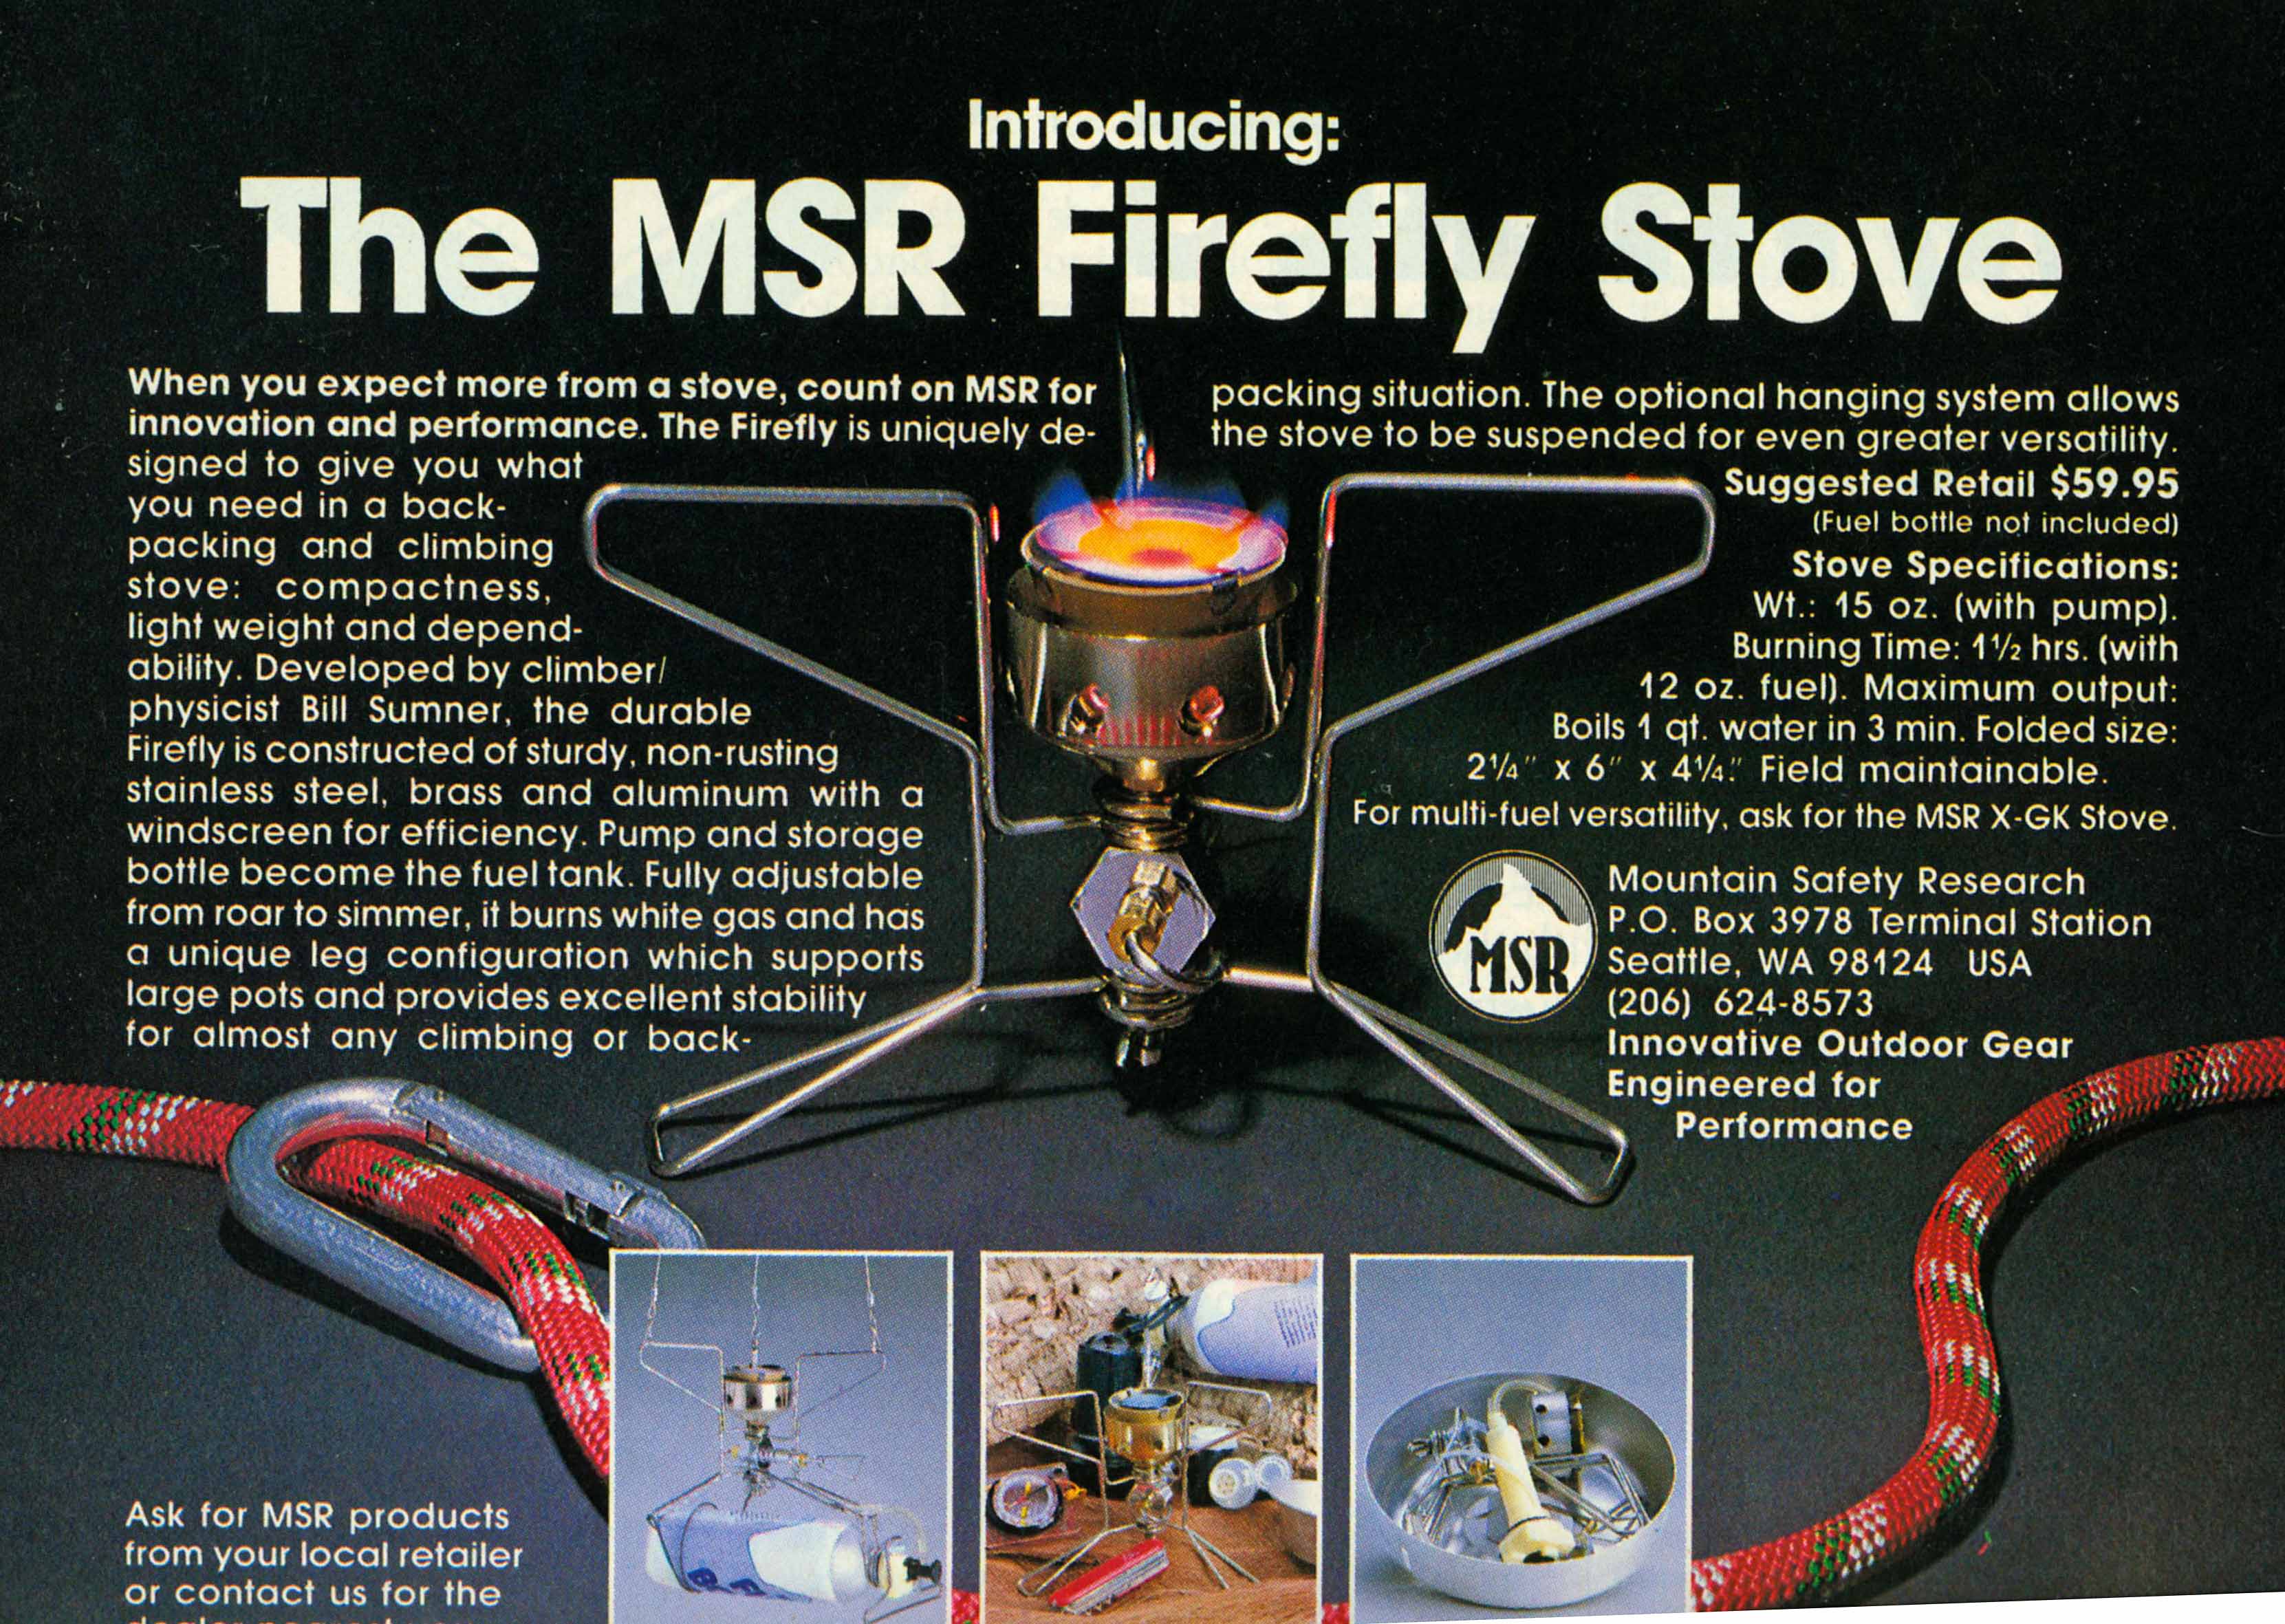 Advertisement From May 1983  Backpacker  On MSR Firefly